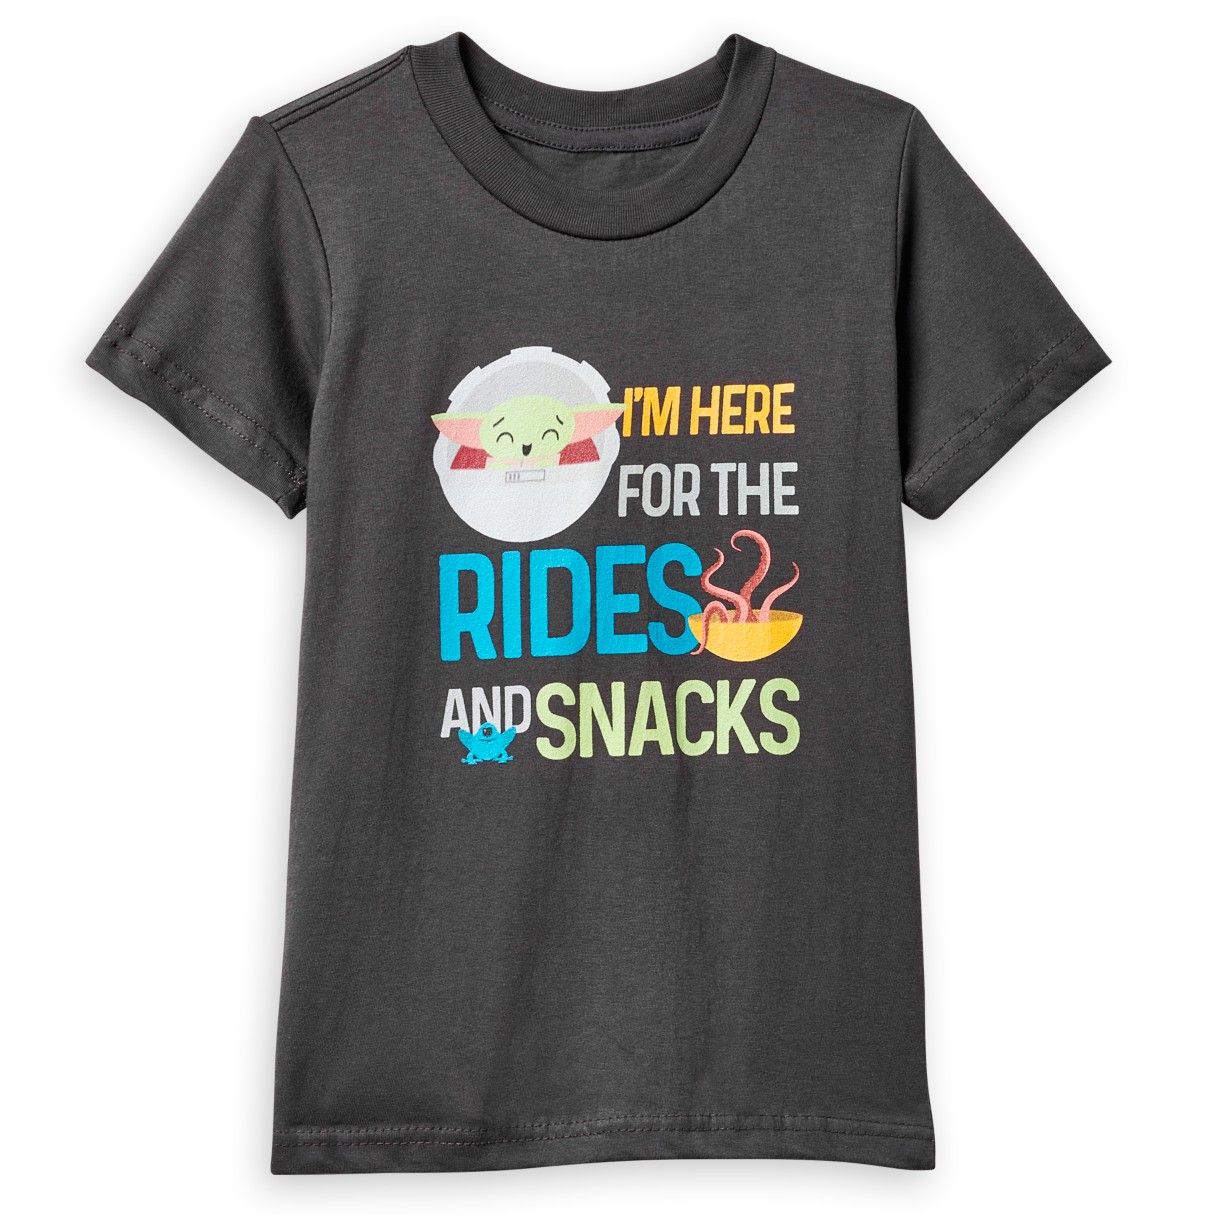 Grogu ''I'm Here for the Rides and Snacks'' T-Shirt for Kids – Star Wars: The Mandalorian